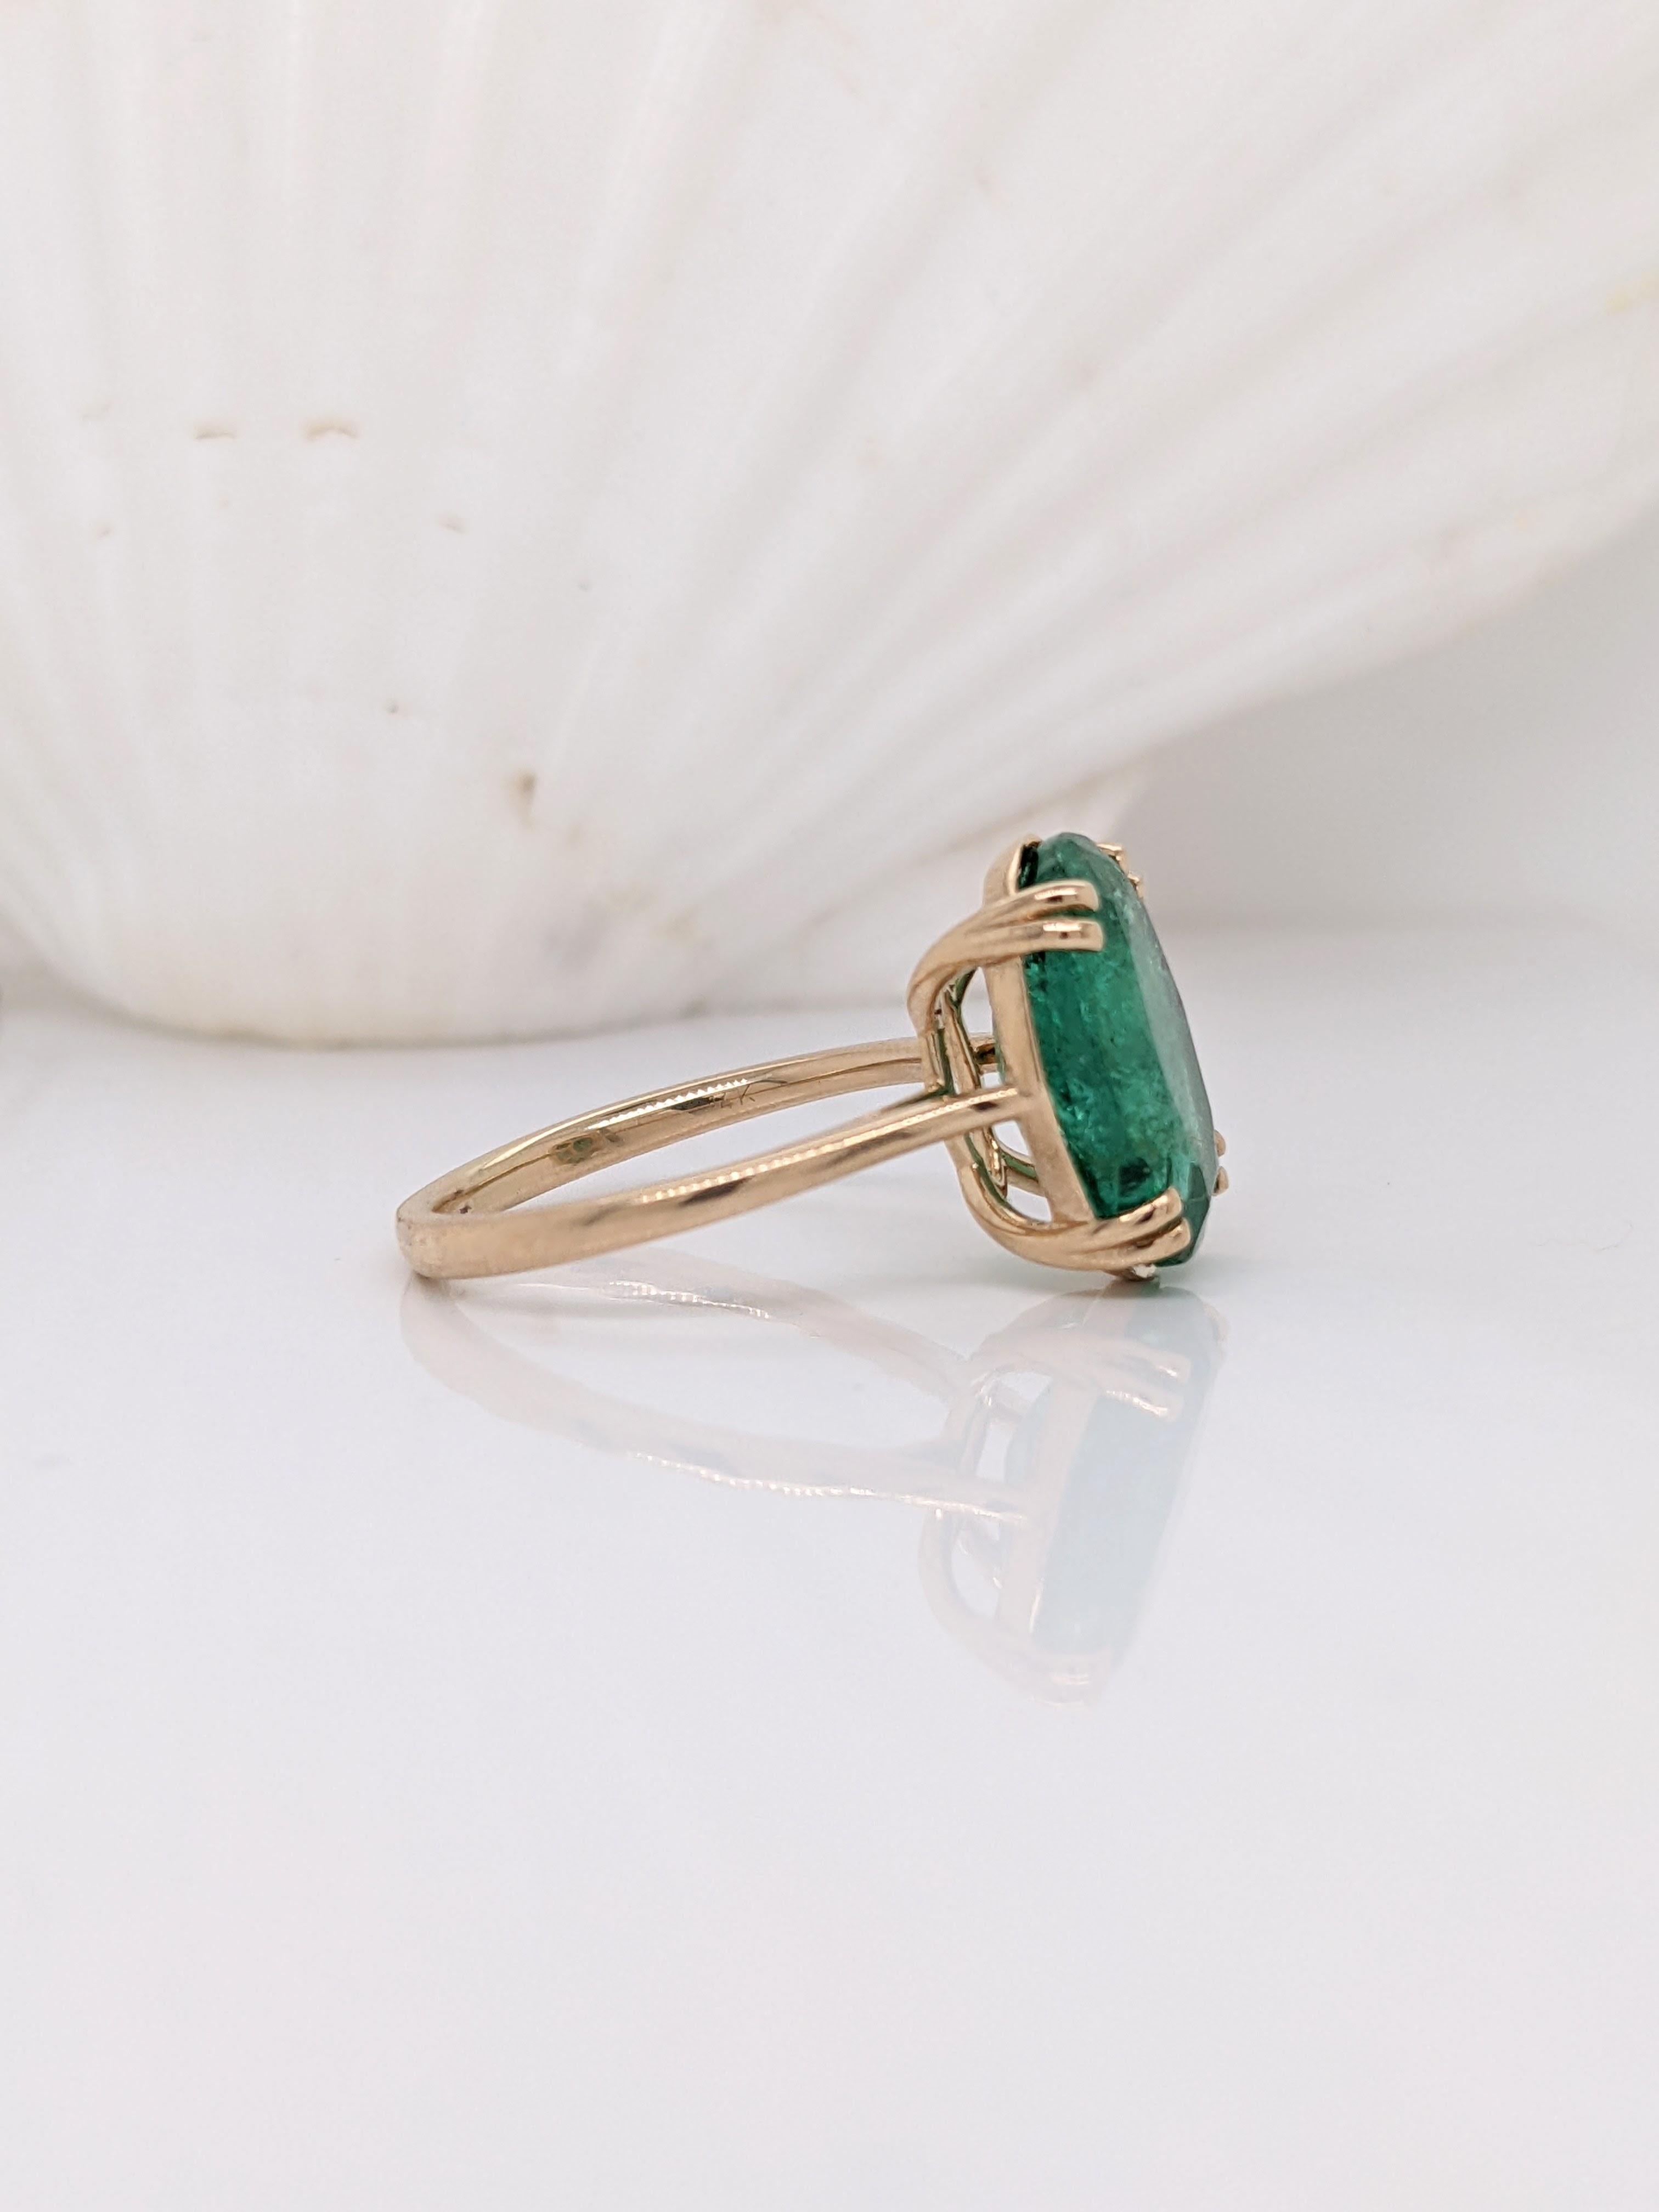 Victorien 4.78ct Emerald Ring in Solid 14k Yellow Gold Solitaire Emerald Oval 14x10mm en vente